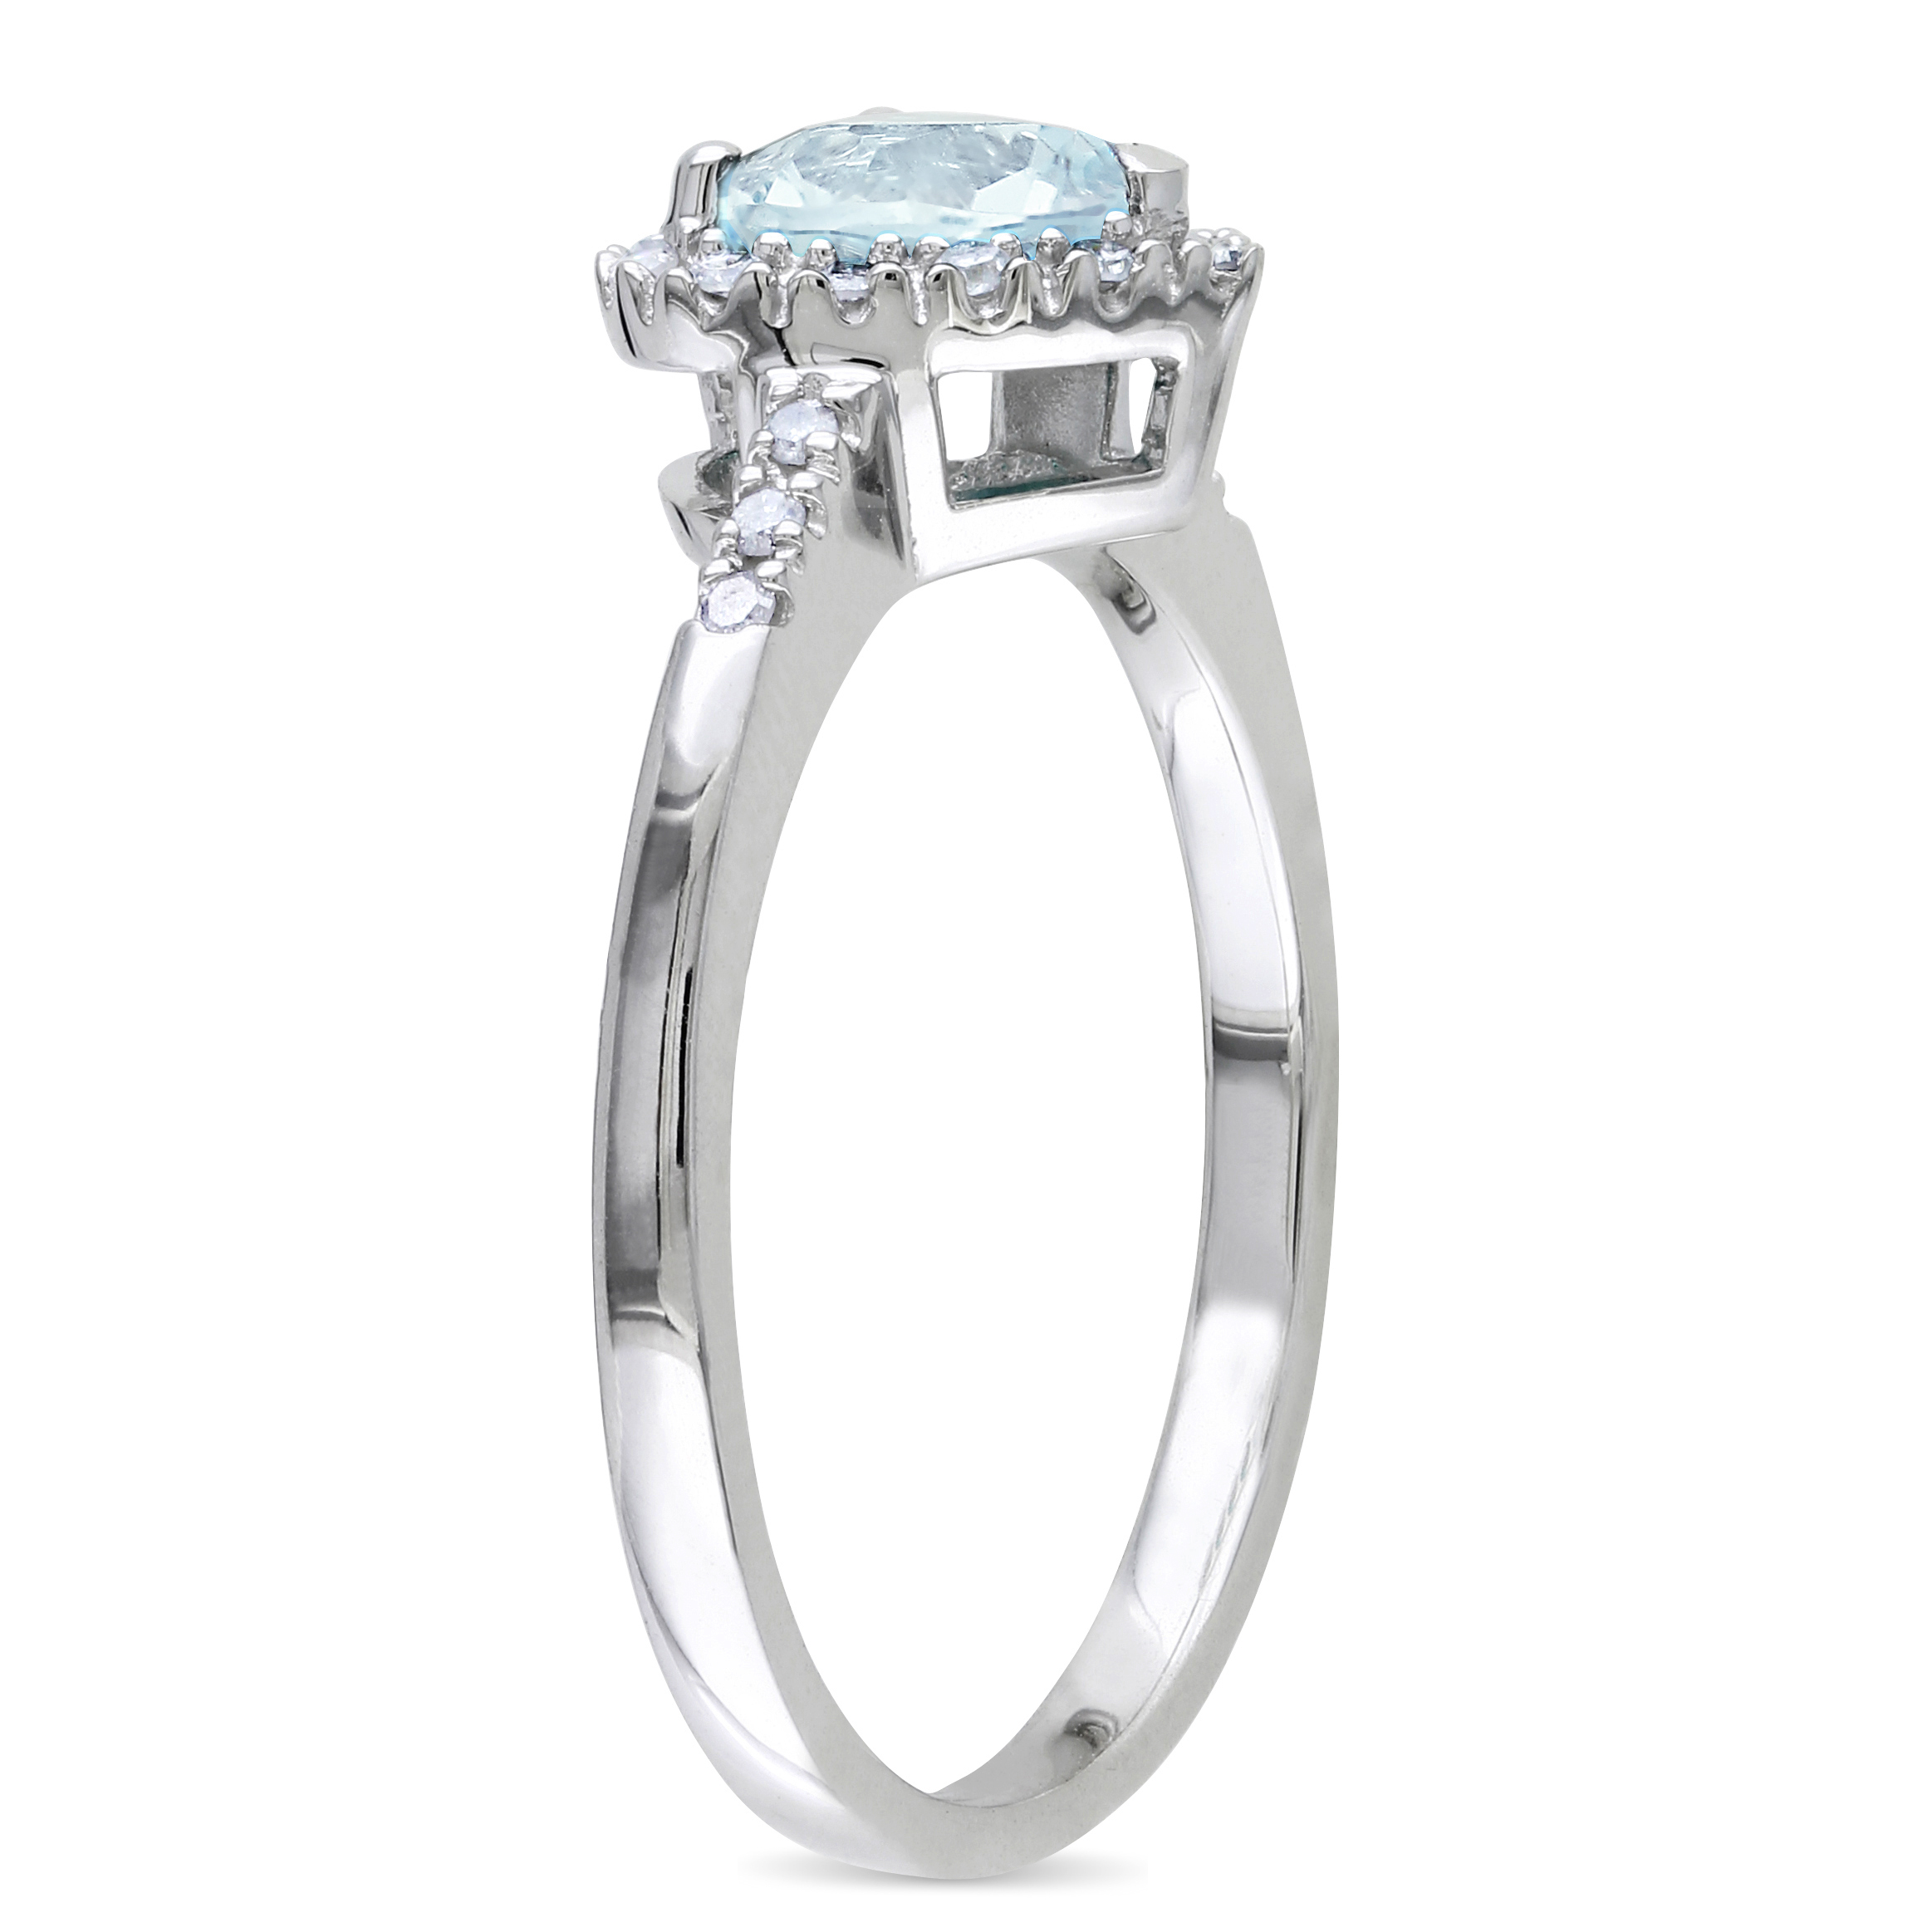 1/10 CT TW Diamond and Aquamarine Heart Halo Ring in Sterling Silver